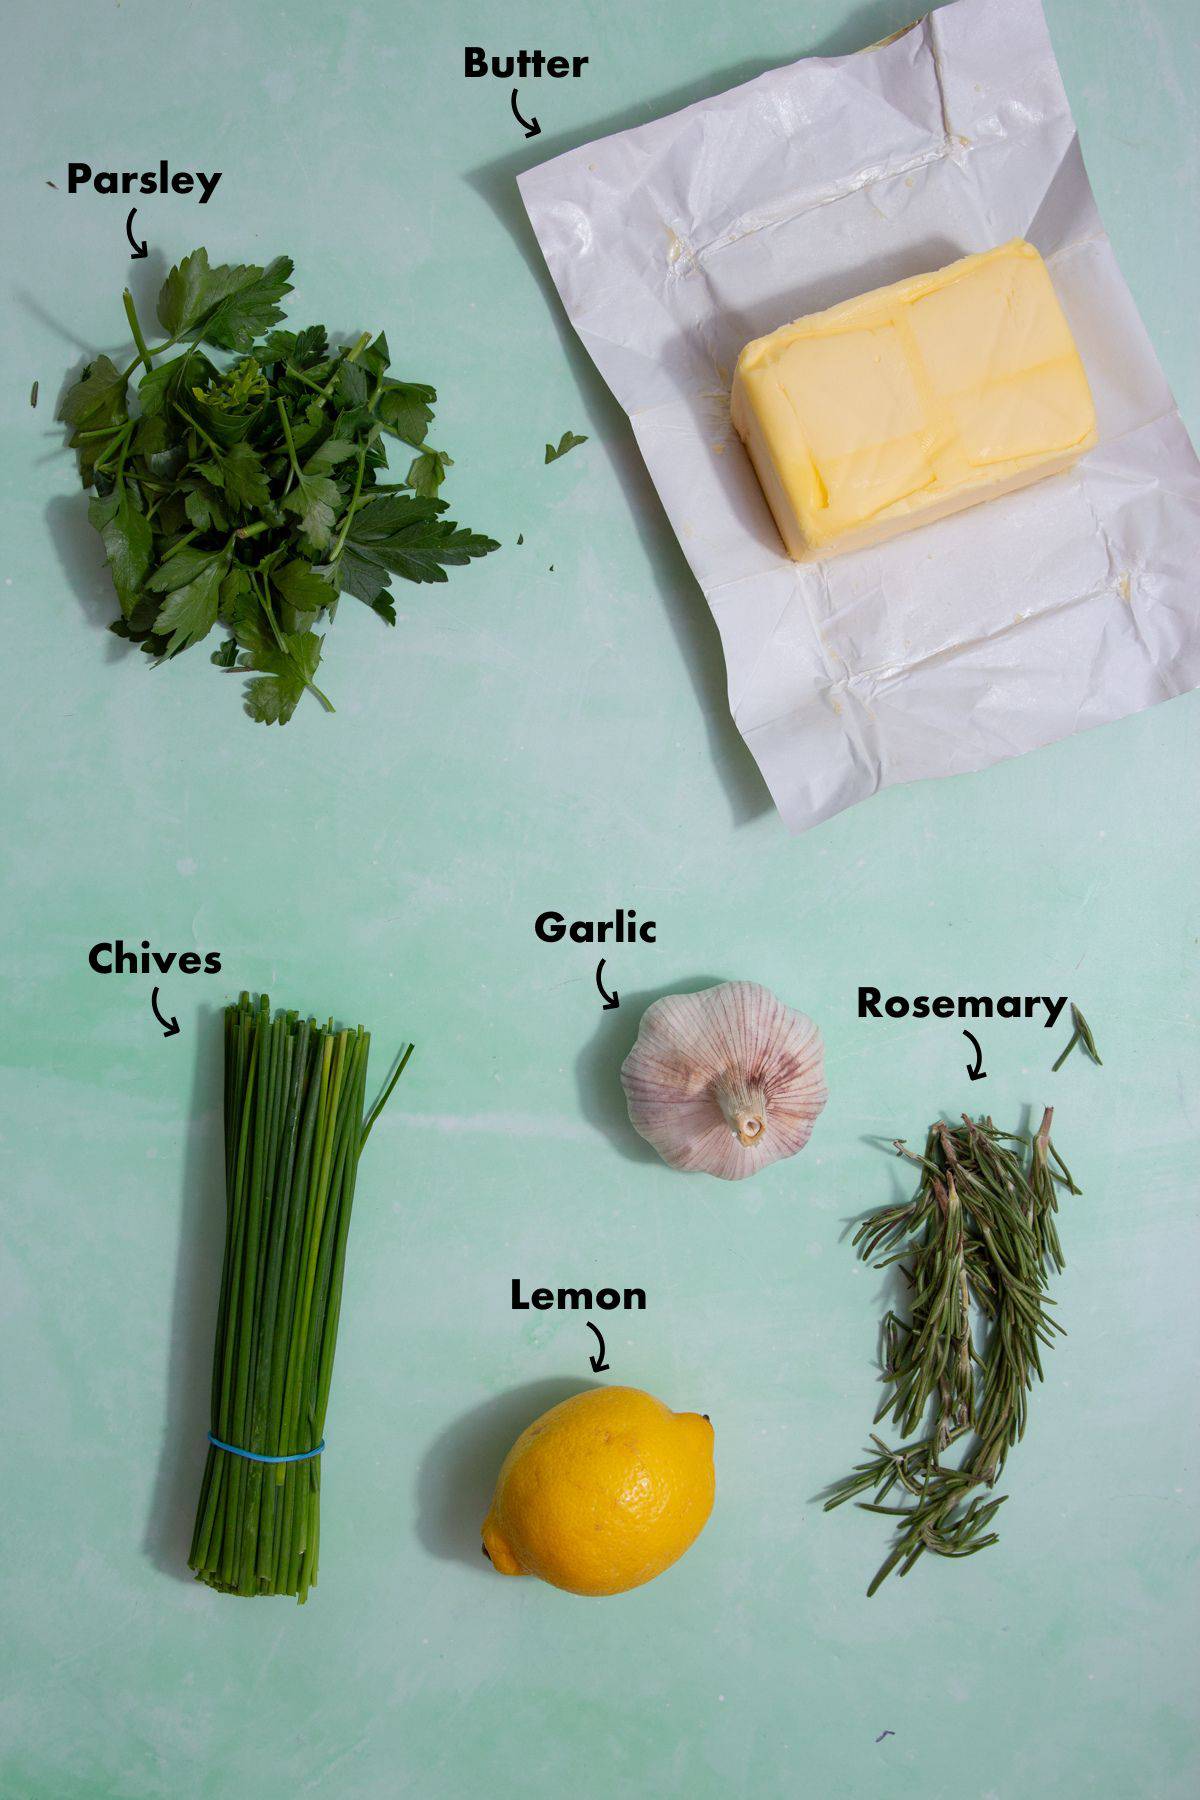 Ingredients laid out on a pale blue background to make the butter and herbs.